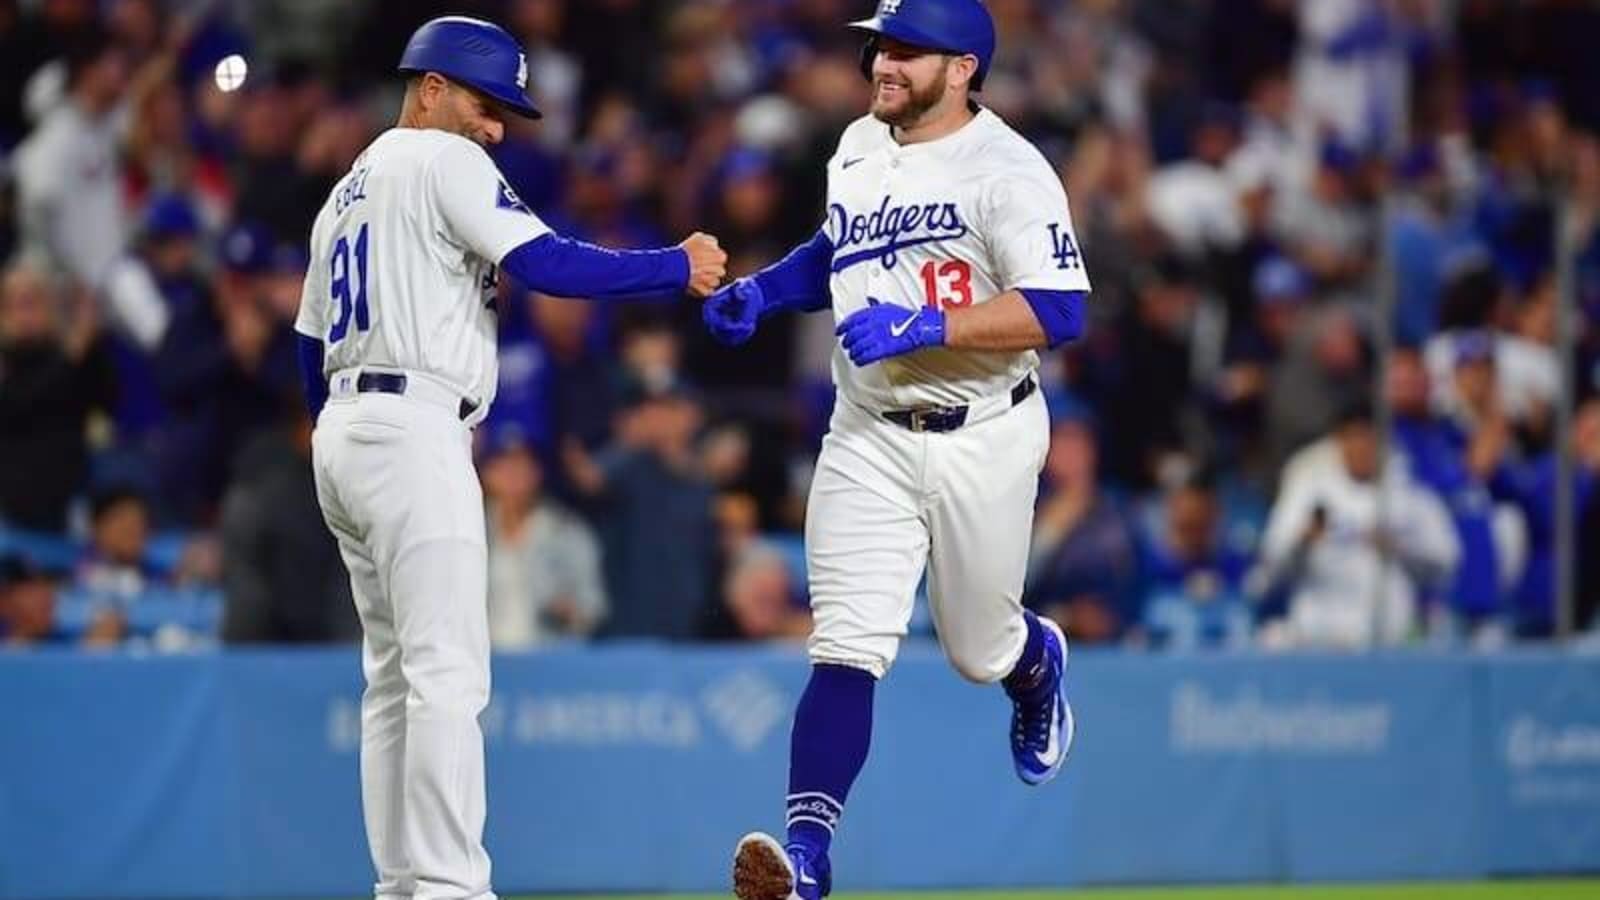  Max Muncy Feeling Good At Plate After 3-Home Run Game